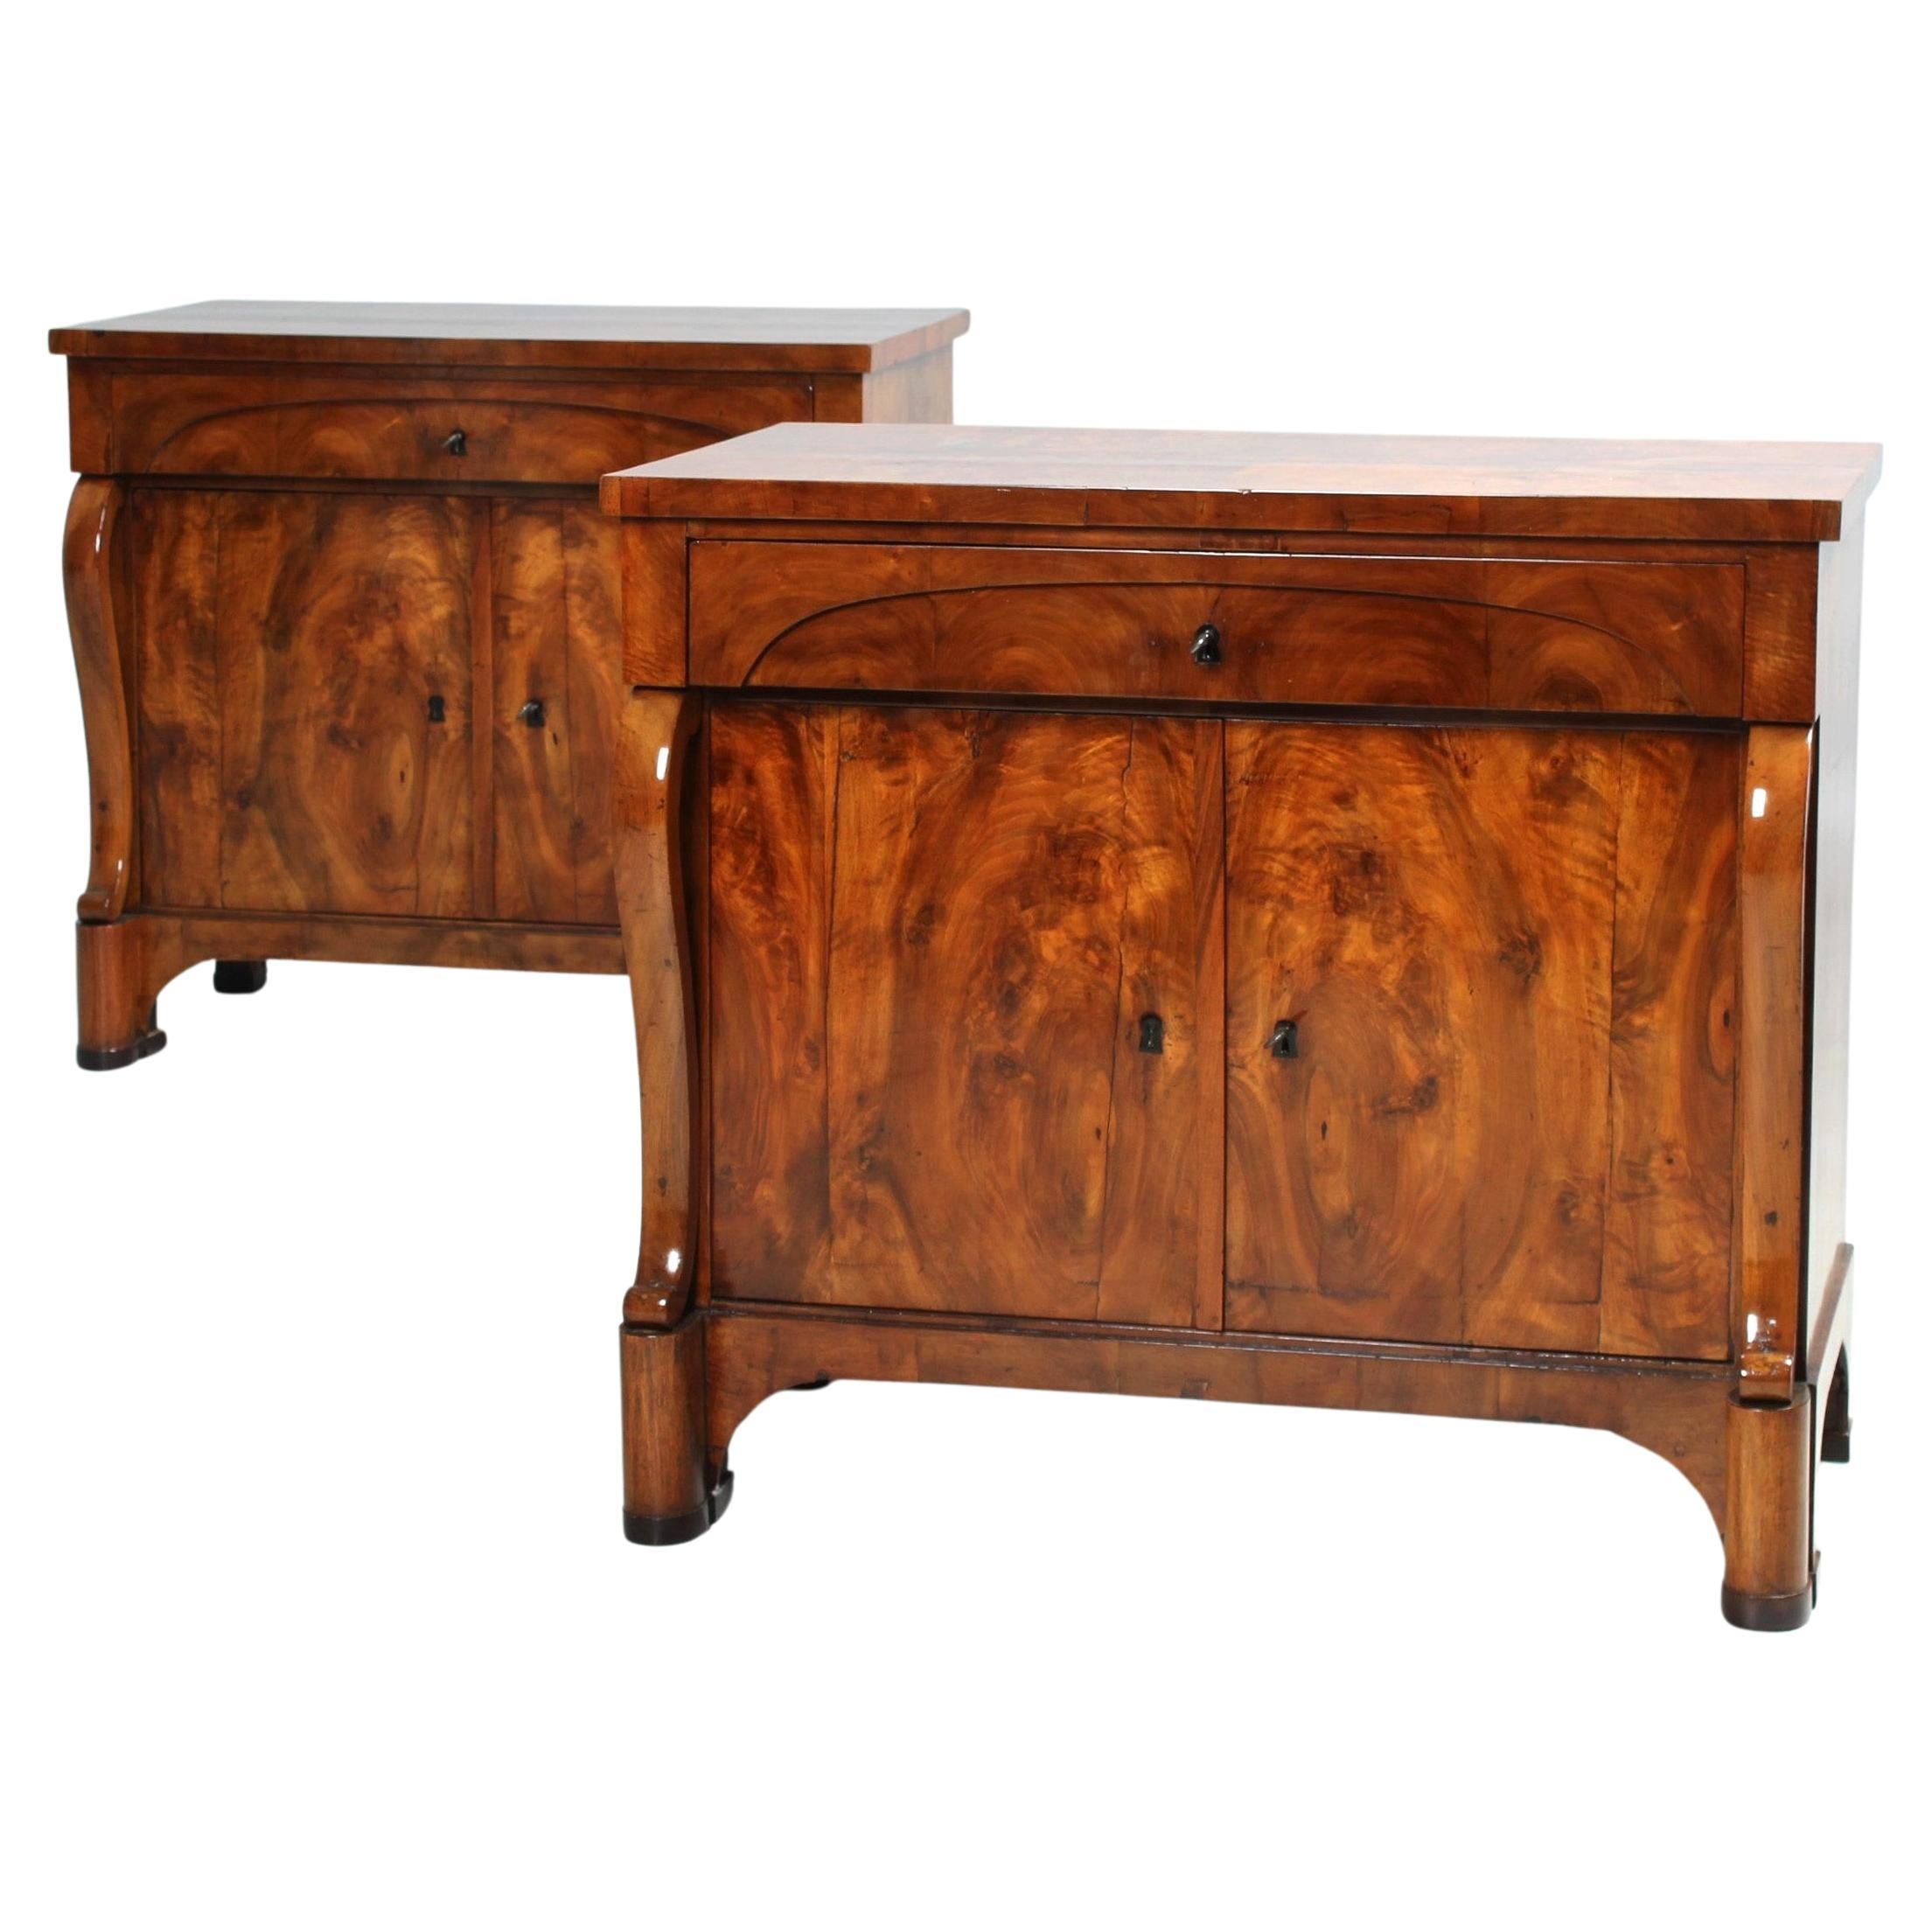 Pair of Early 19th Century Biedermeier Chests or Sideboards, Walnut, c. 1825